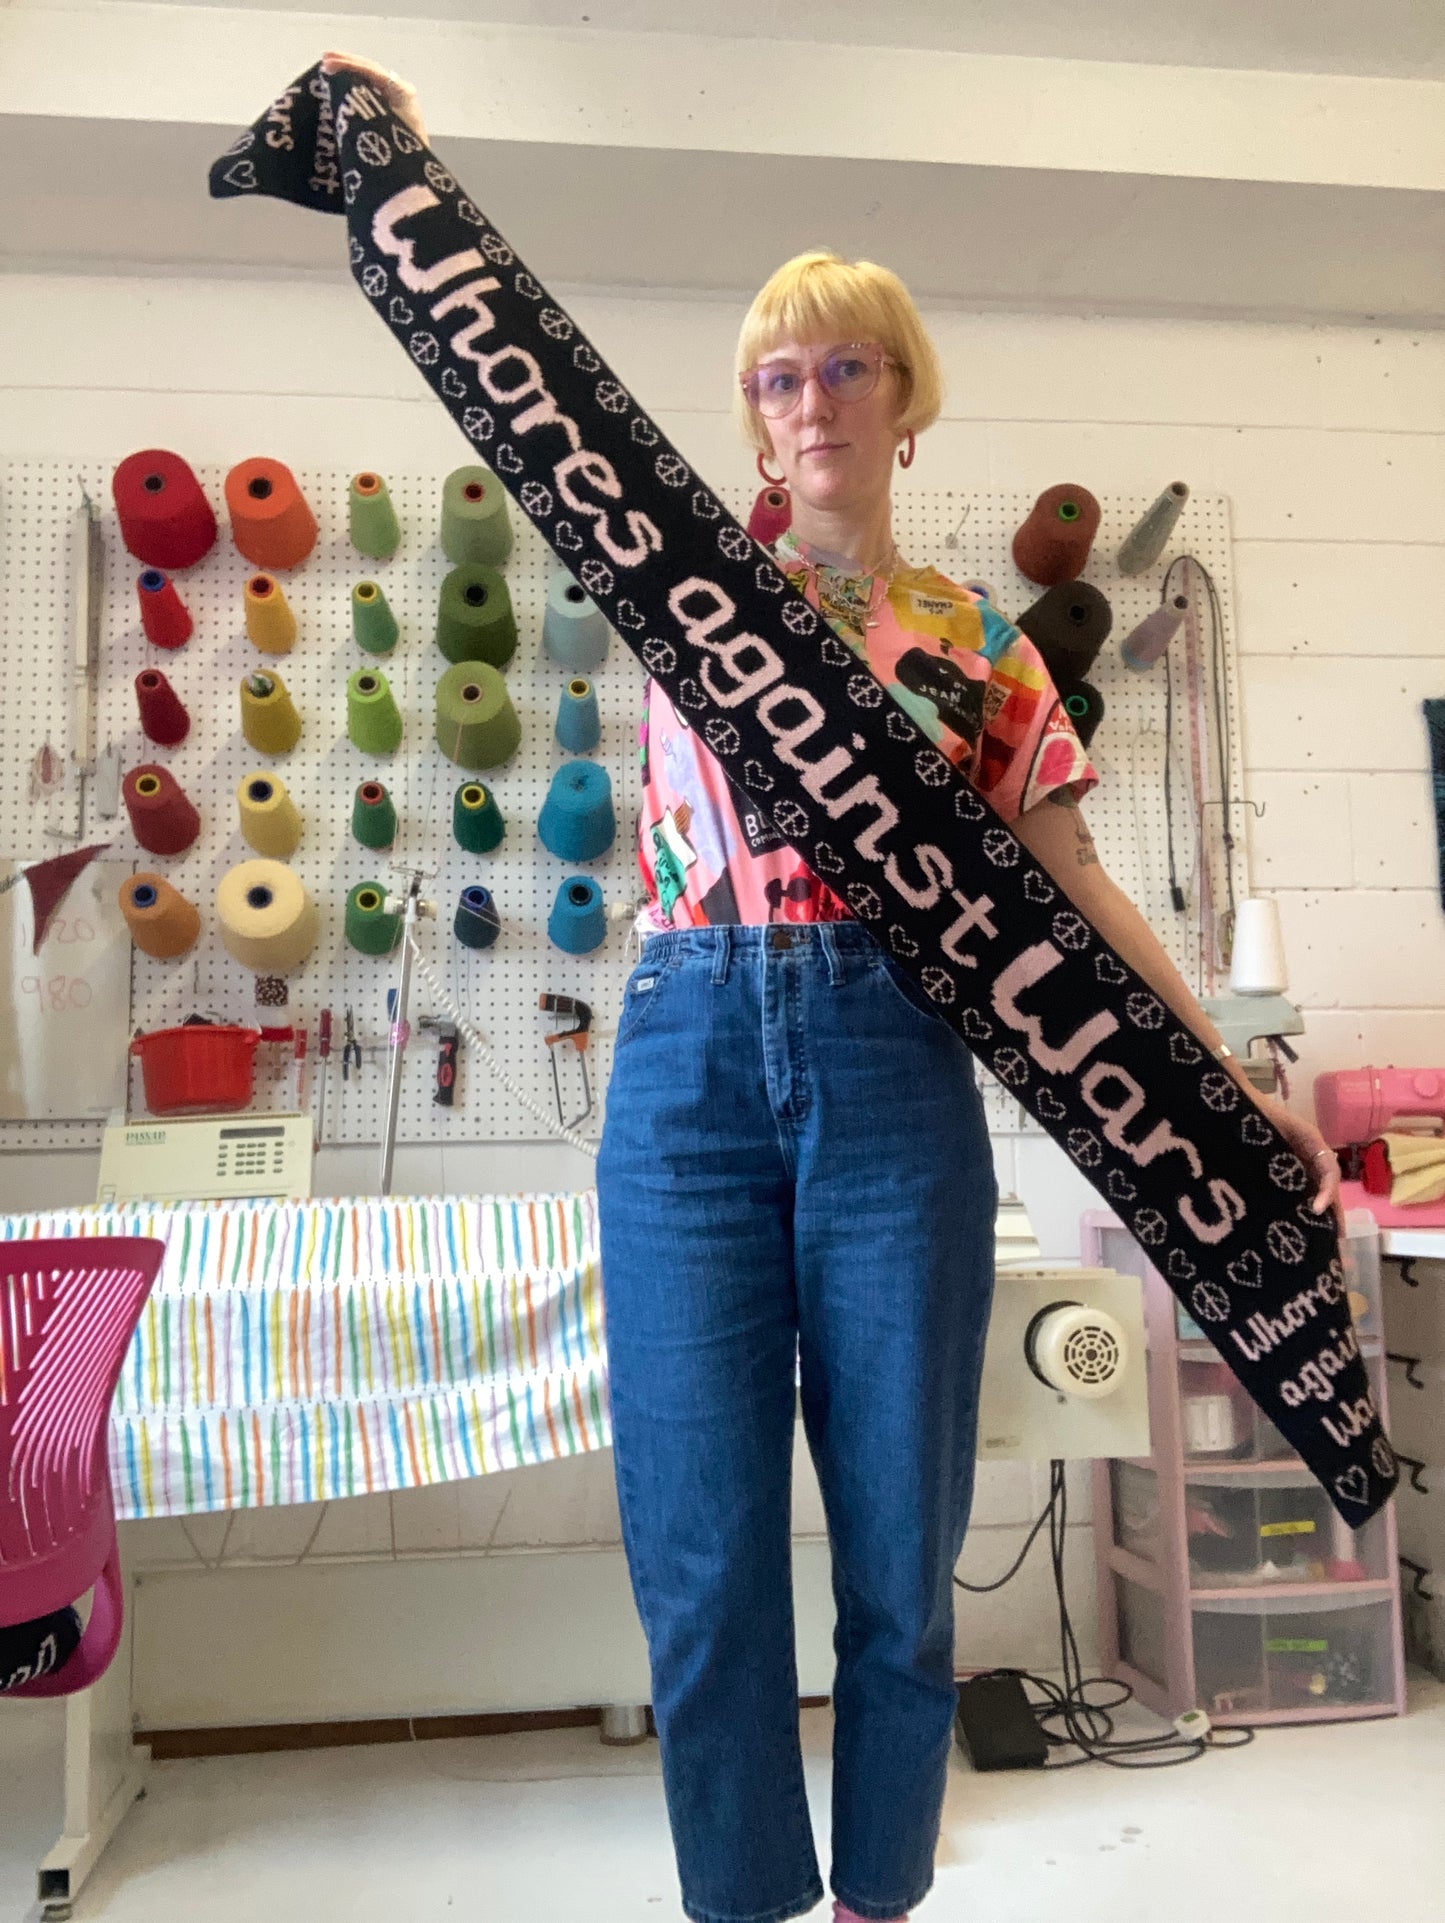 Whores against wars scarf